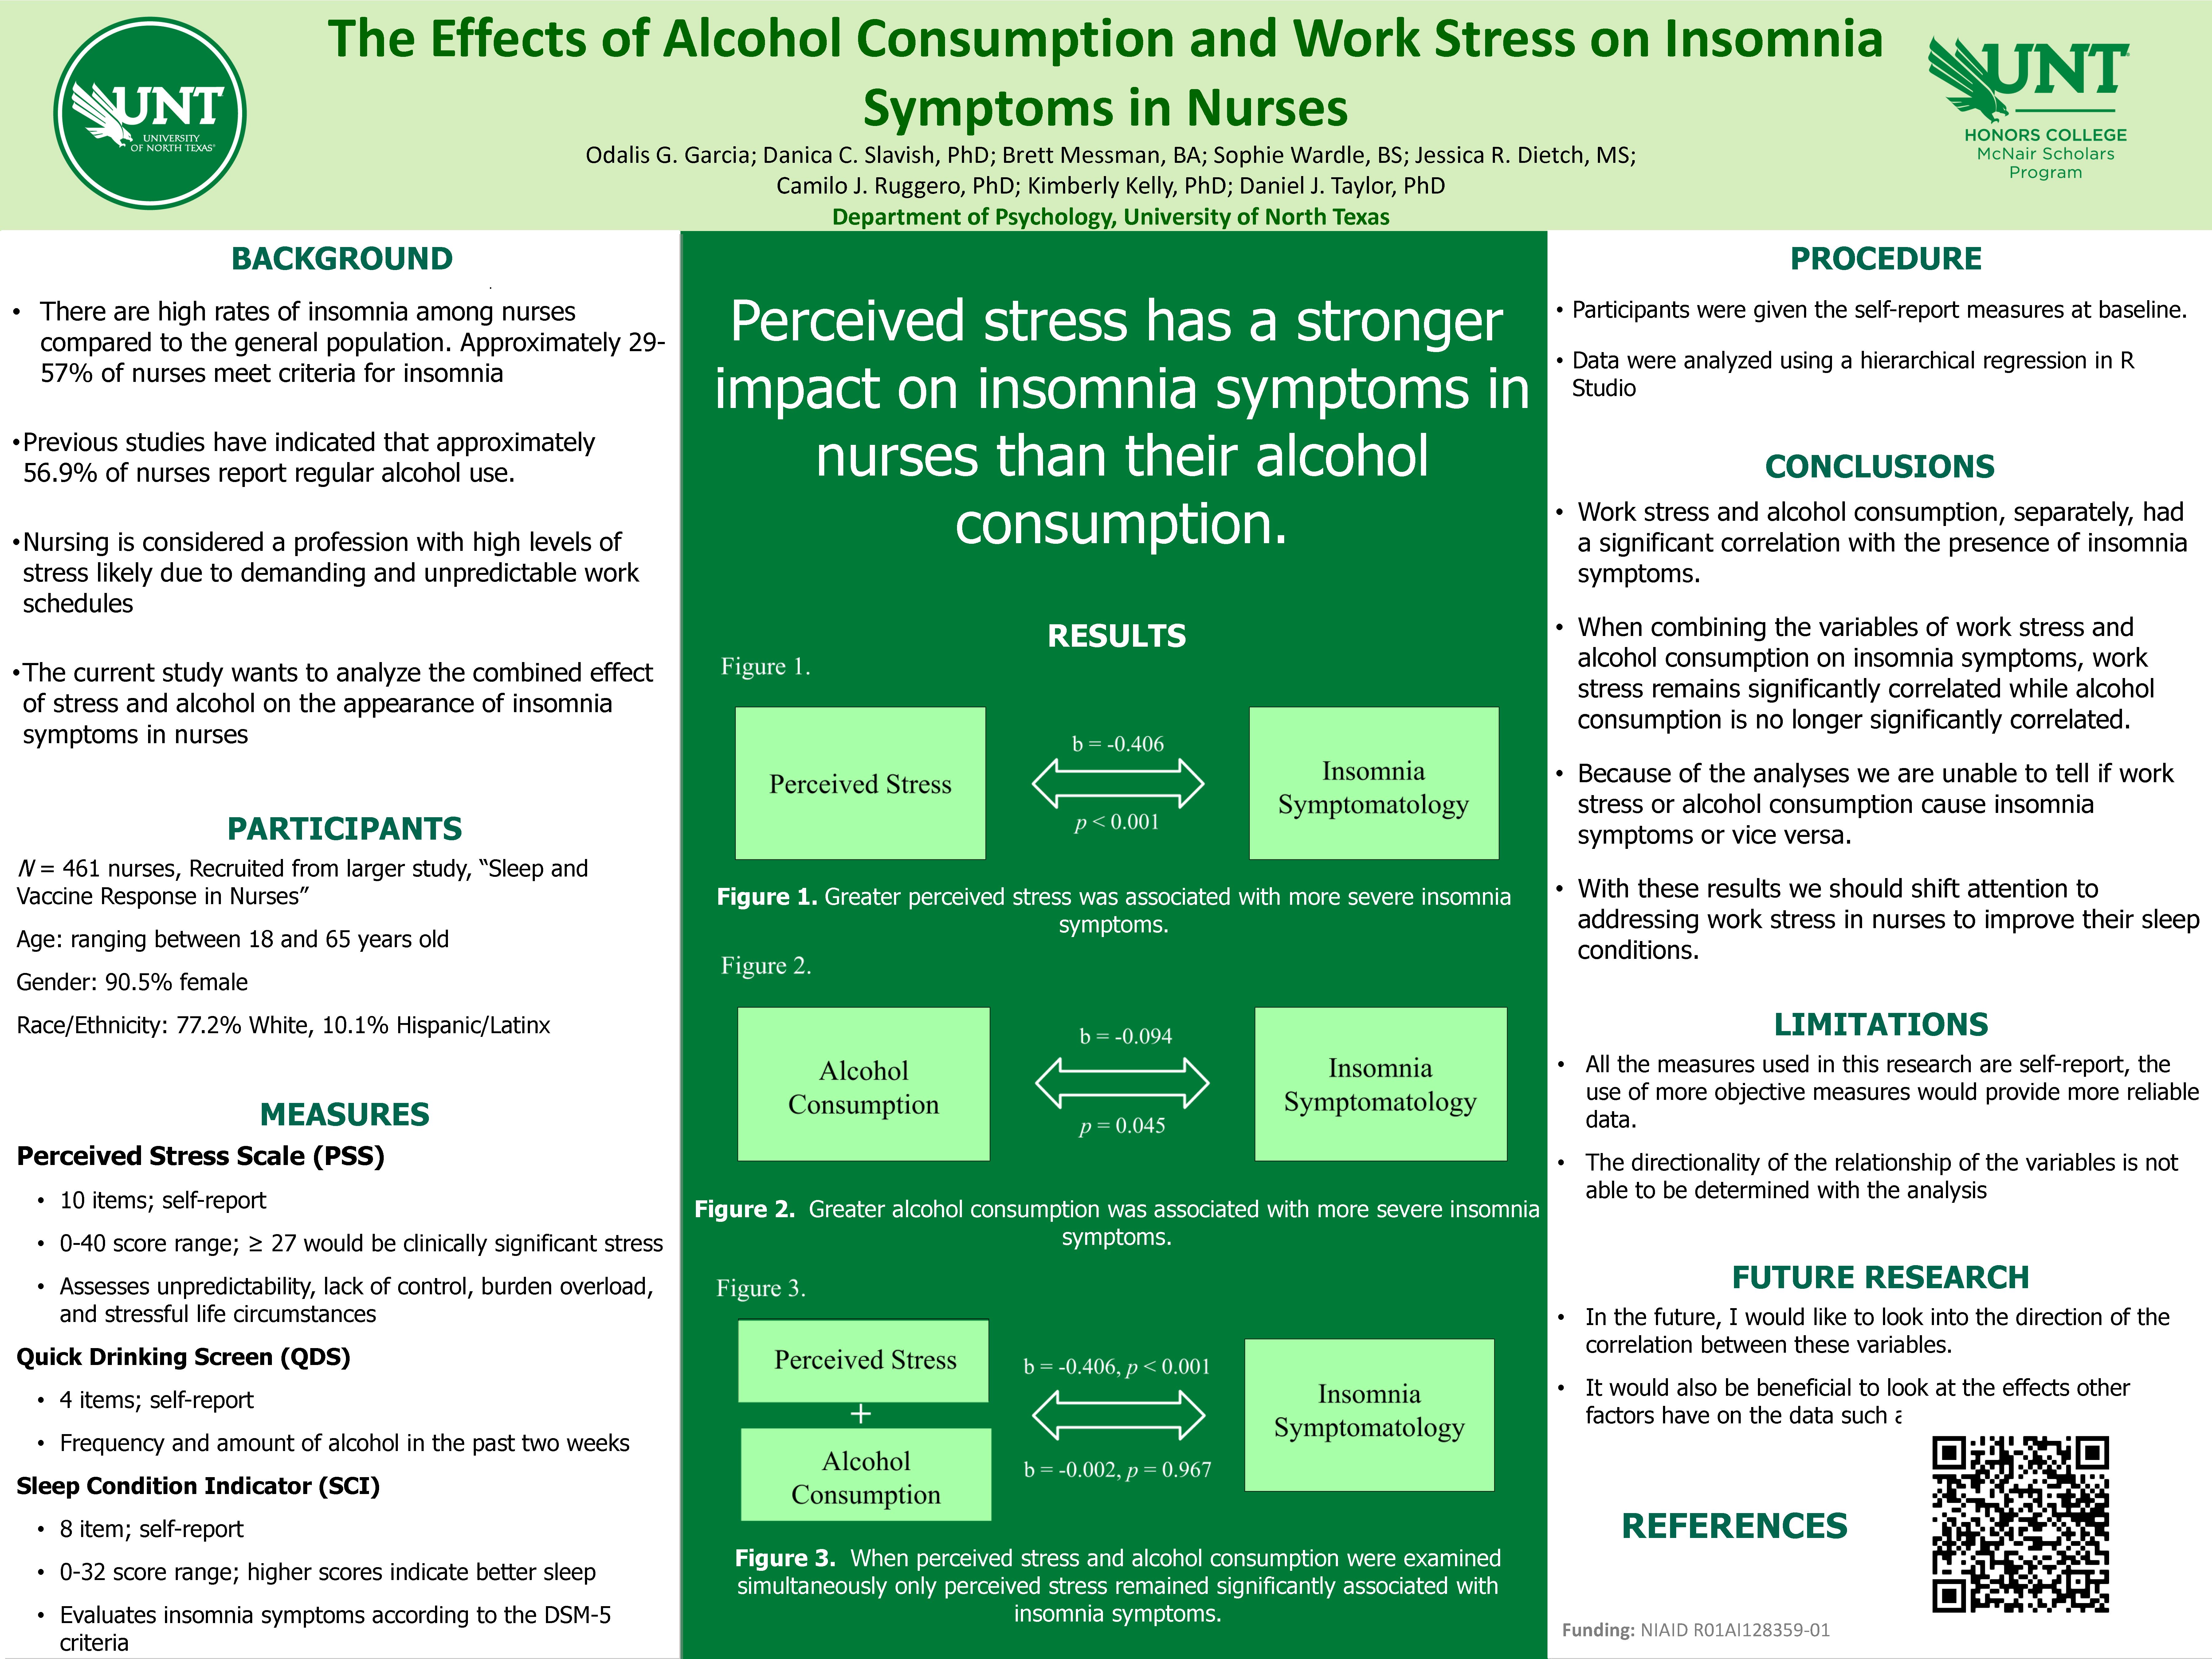 The Effects of Alcohol Consumption and Work Stress on Insomnia Symptoms in Nurses